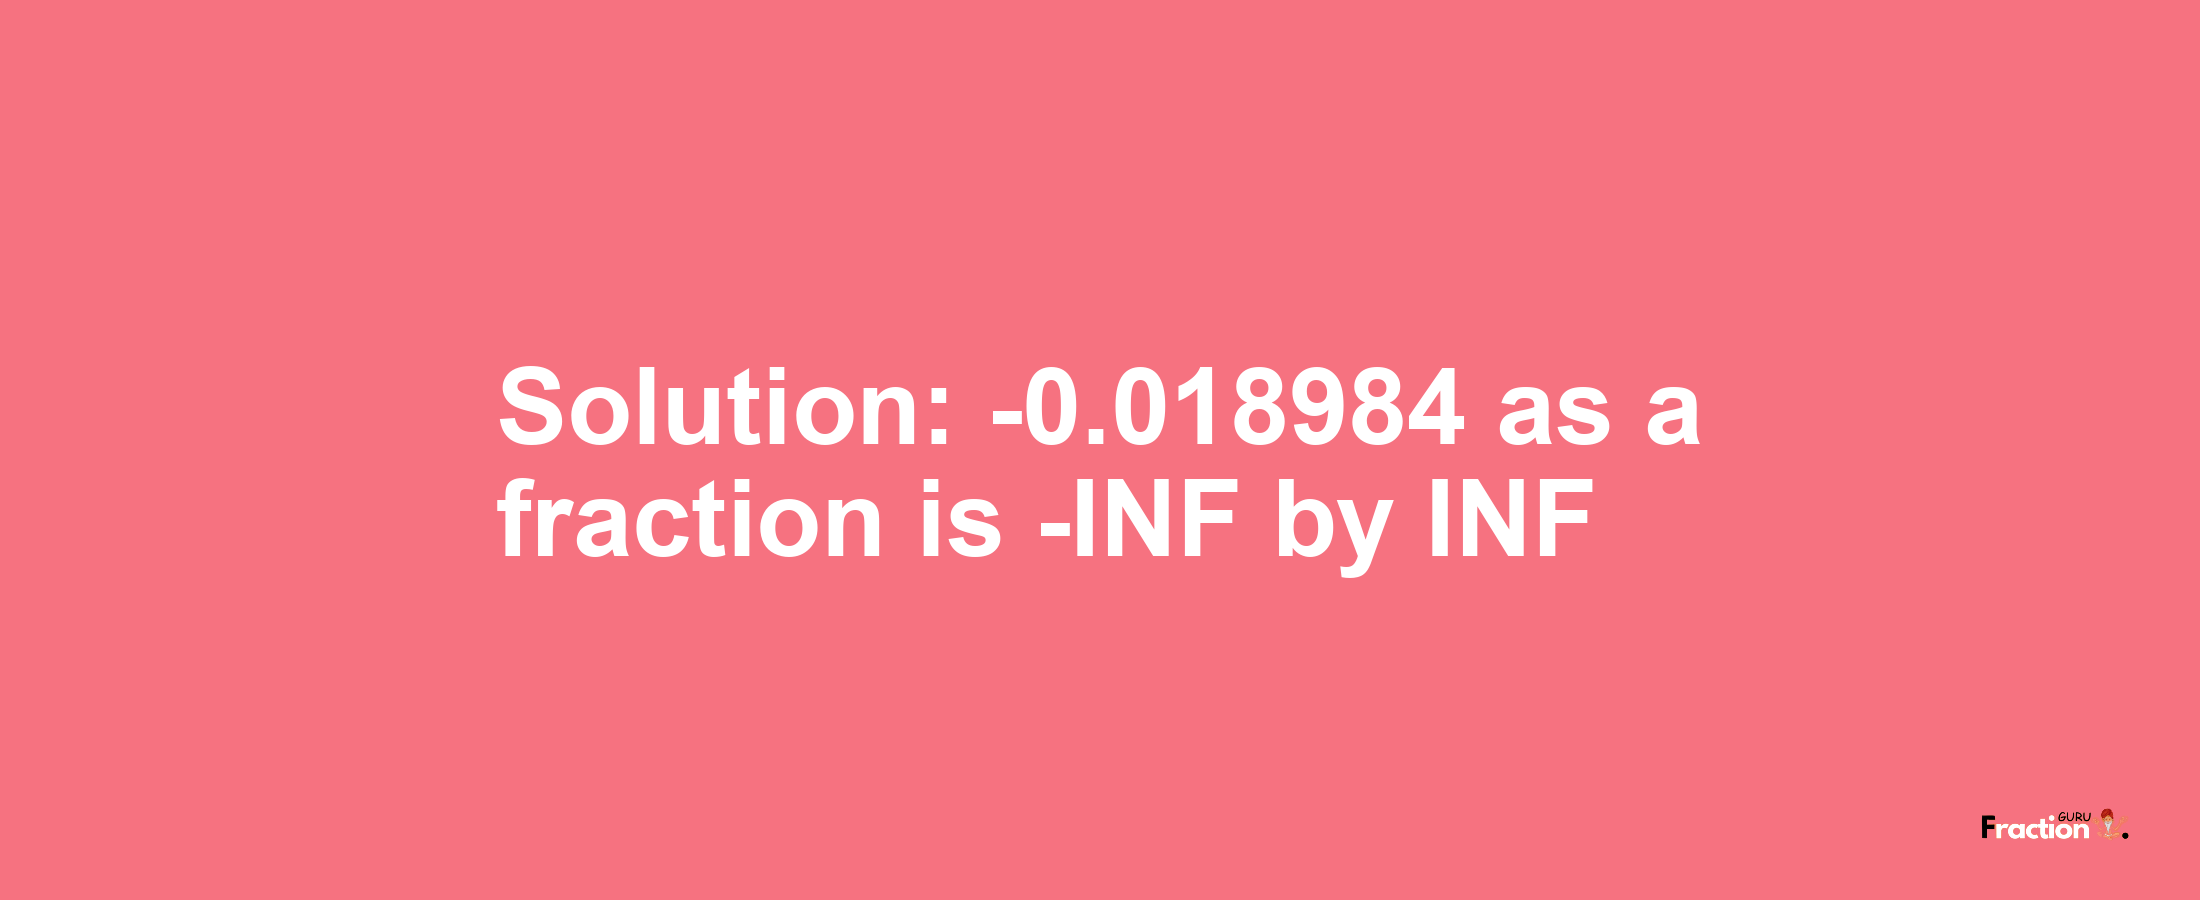 Solution:-0.018984 as a fraction is -INF/INF